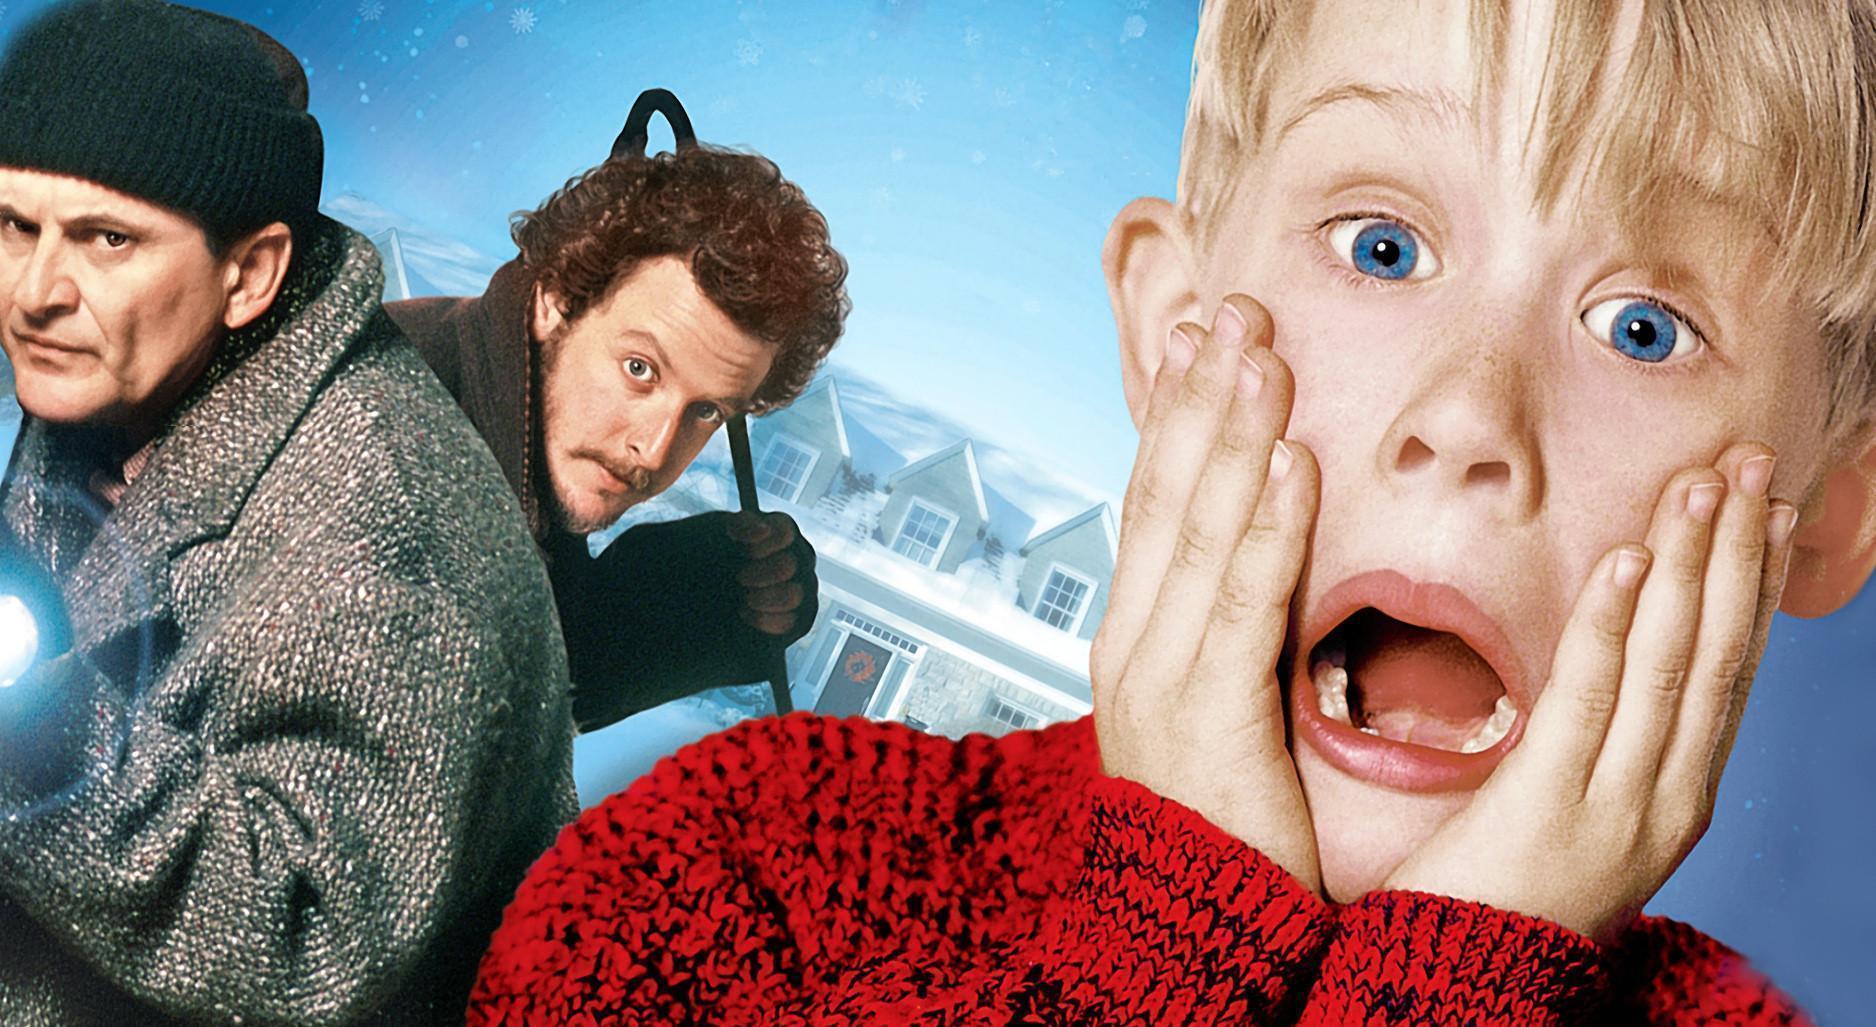 800x600px Home Alone 239.66 KB